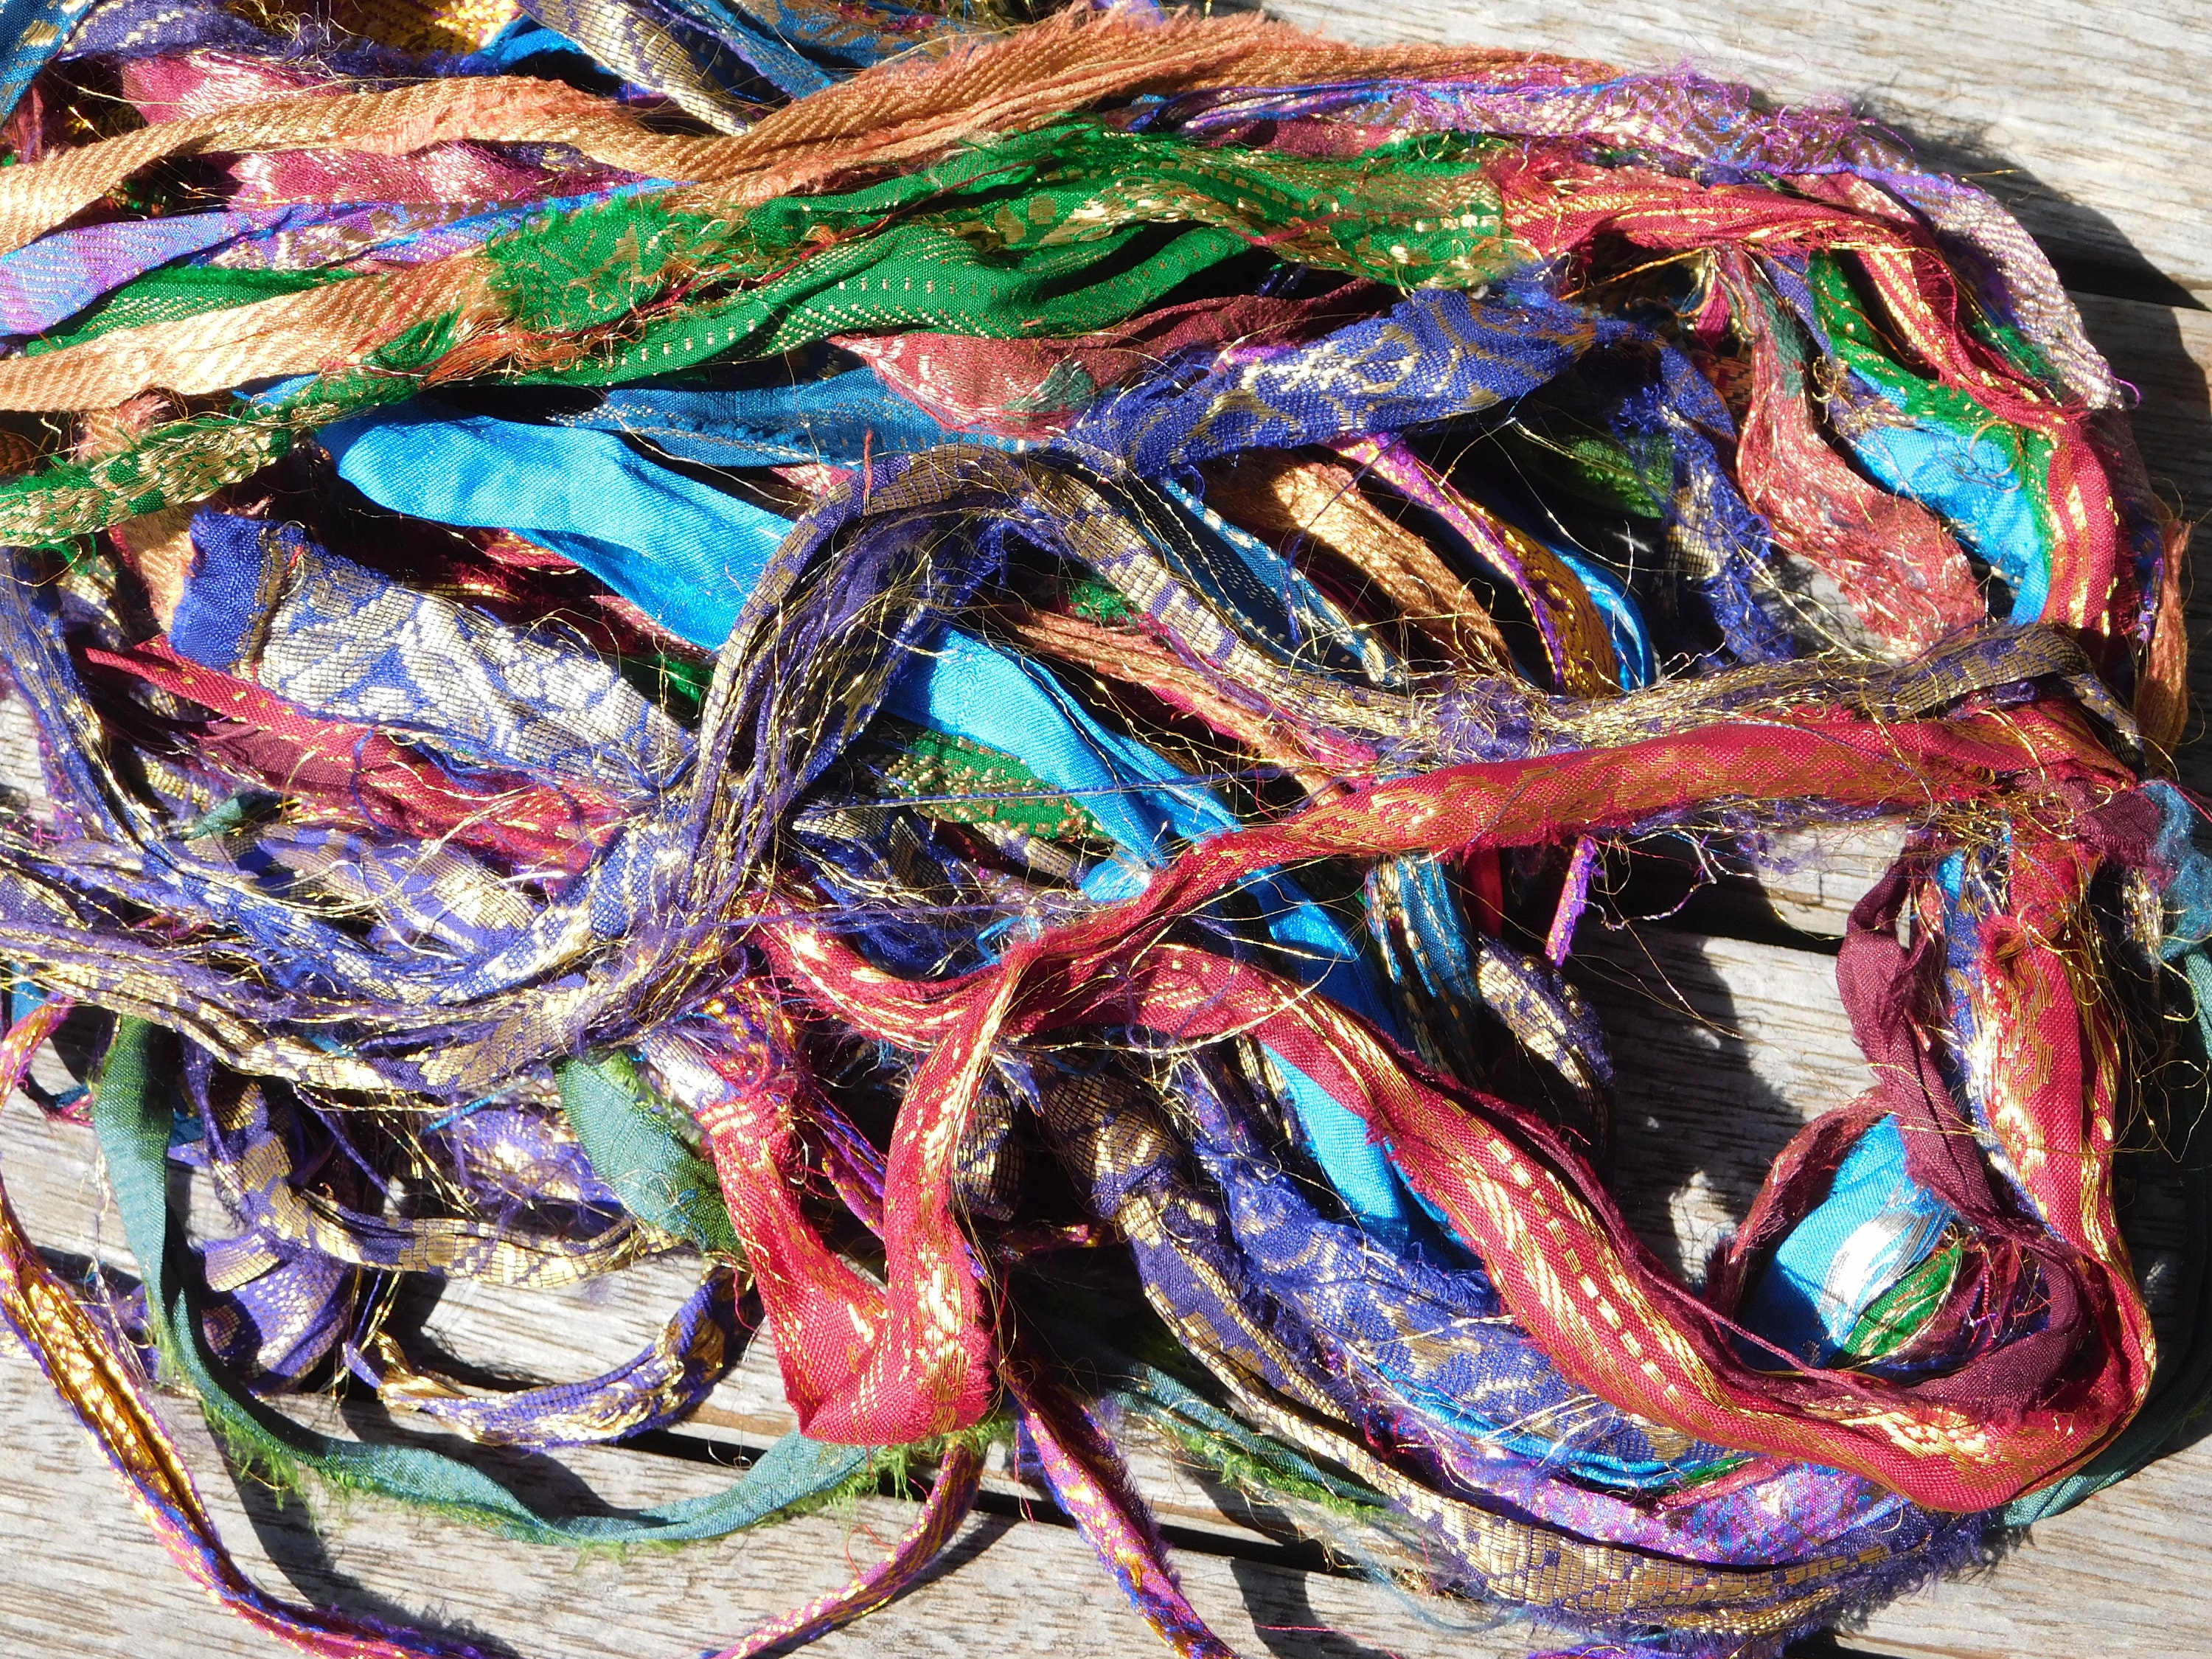 Recycled sari silk gift wrap ribbon ties - bag of 8 mixed colour ribbons  with stitched edge 90cm (3') long x 2cm (3/4) wide